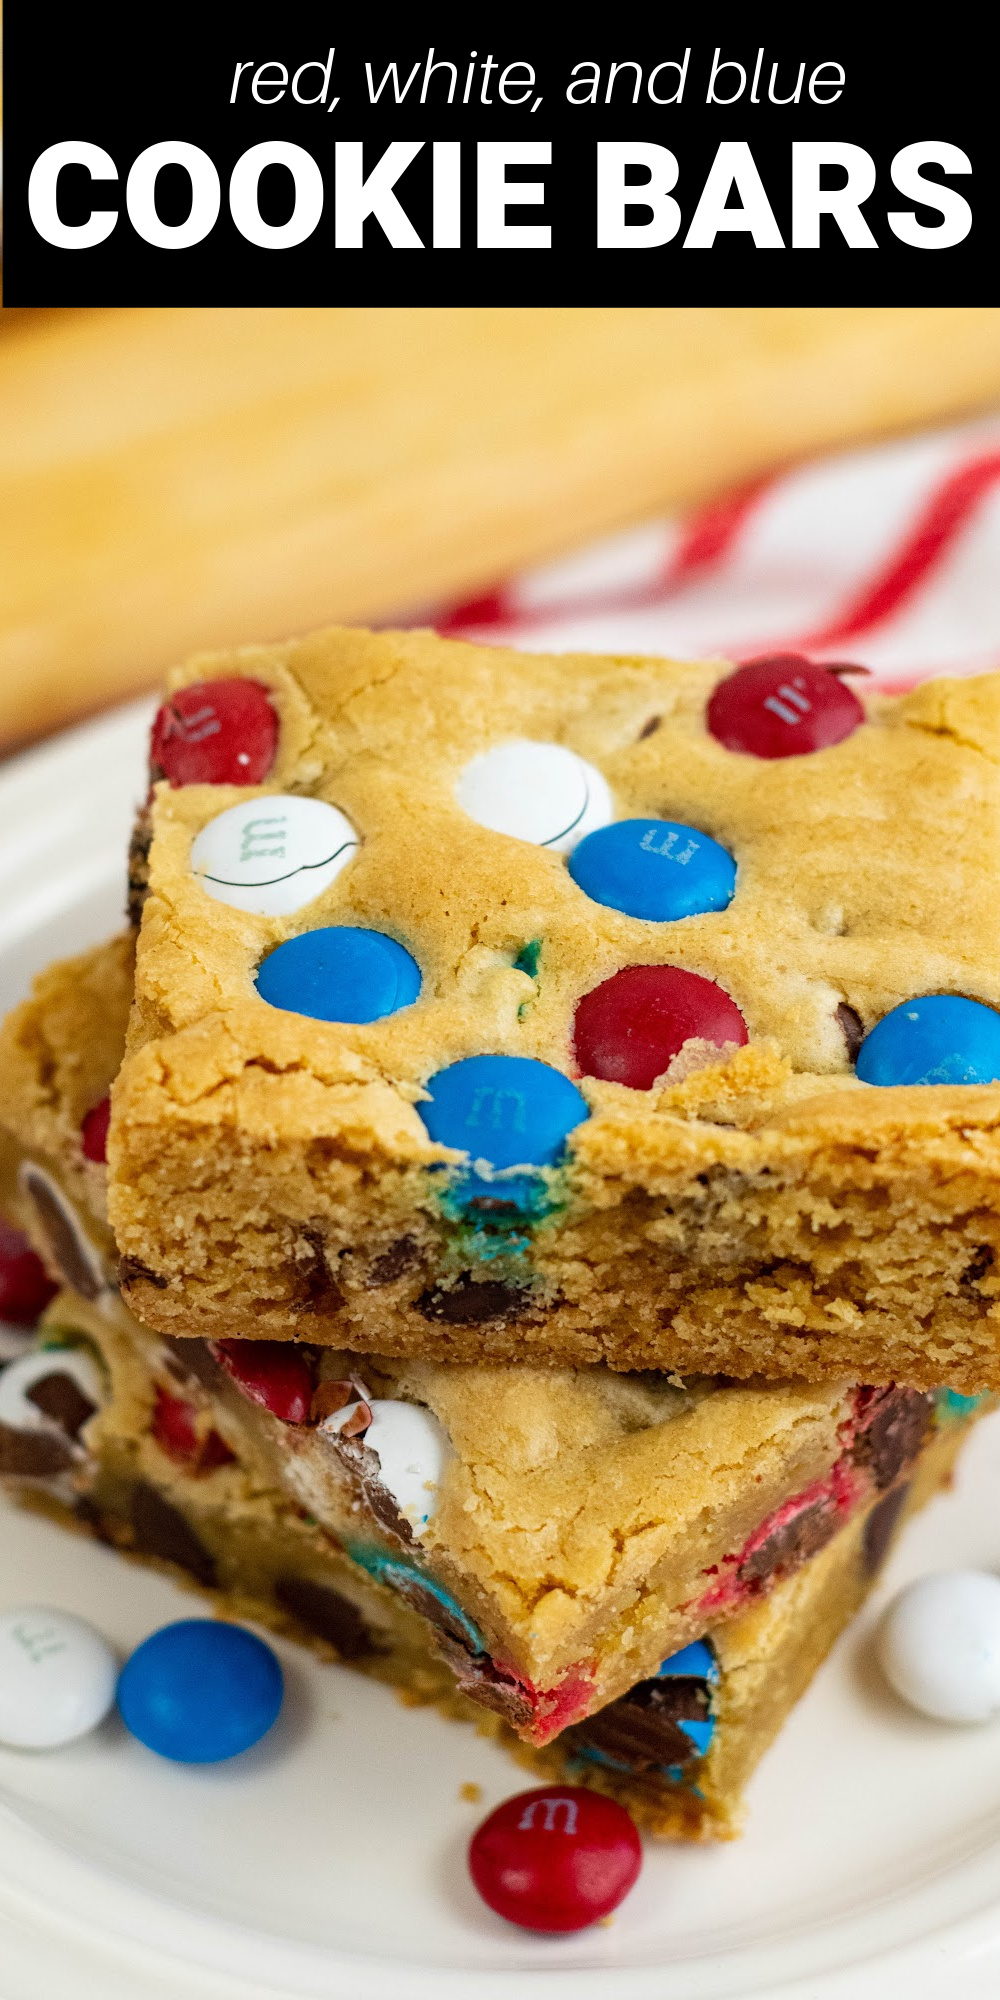 These Red, White, and Blue Cookie Bars are the perfect treat for your next Fourth of July picnic or any patriotic party. They're thick, chewy chocolate chip bars that are studded with colorful M&M’s and delicious chocolate chips in every single bite.